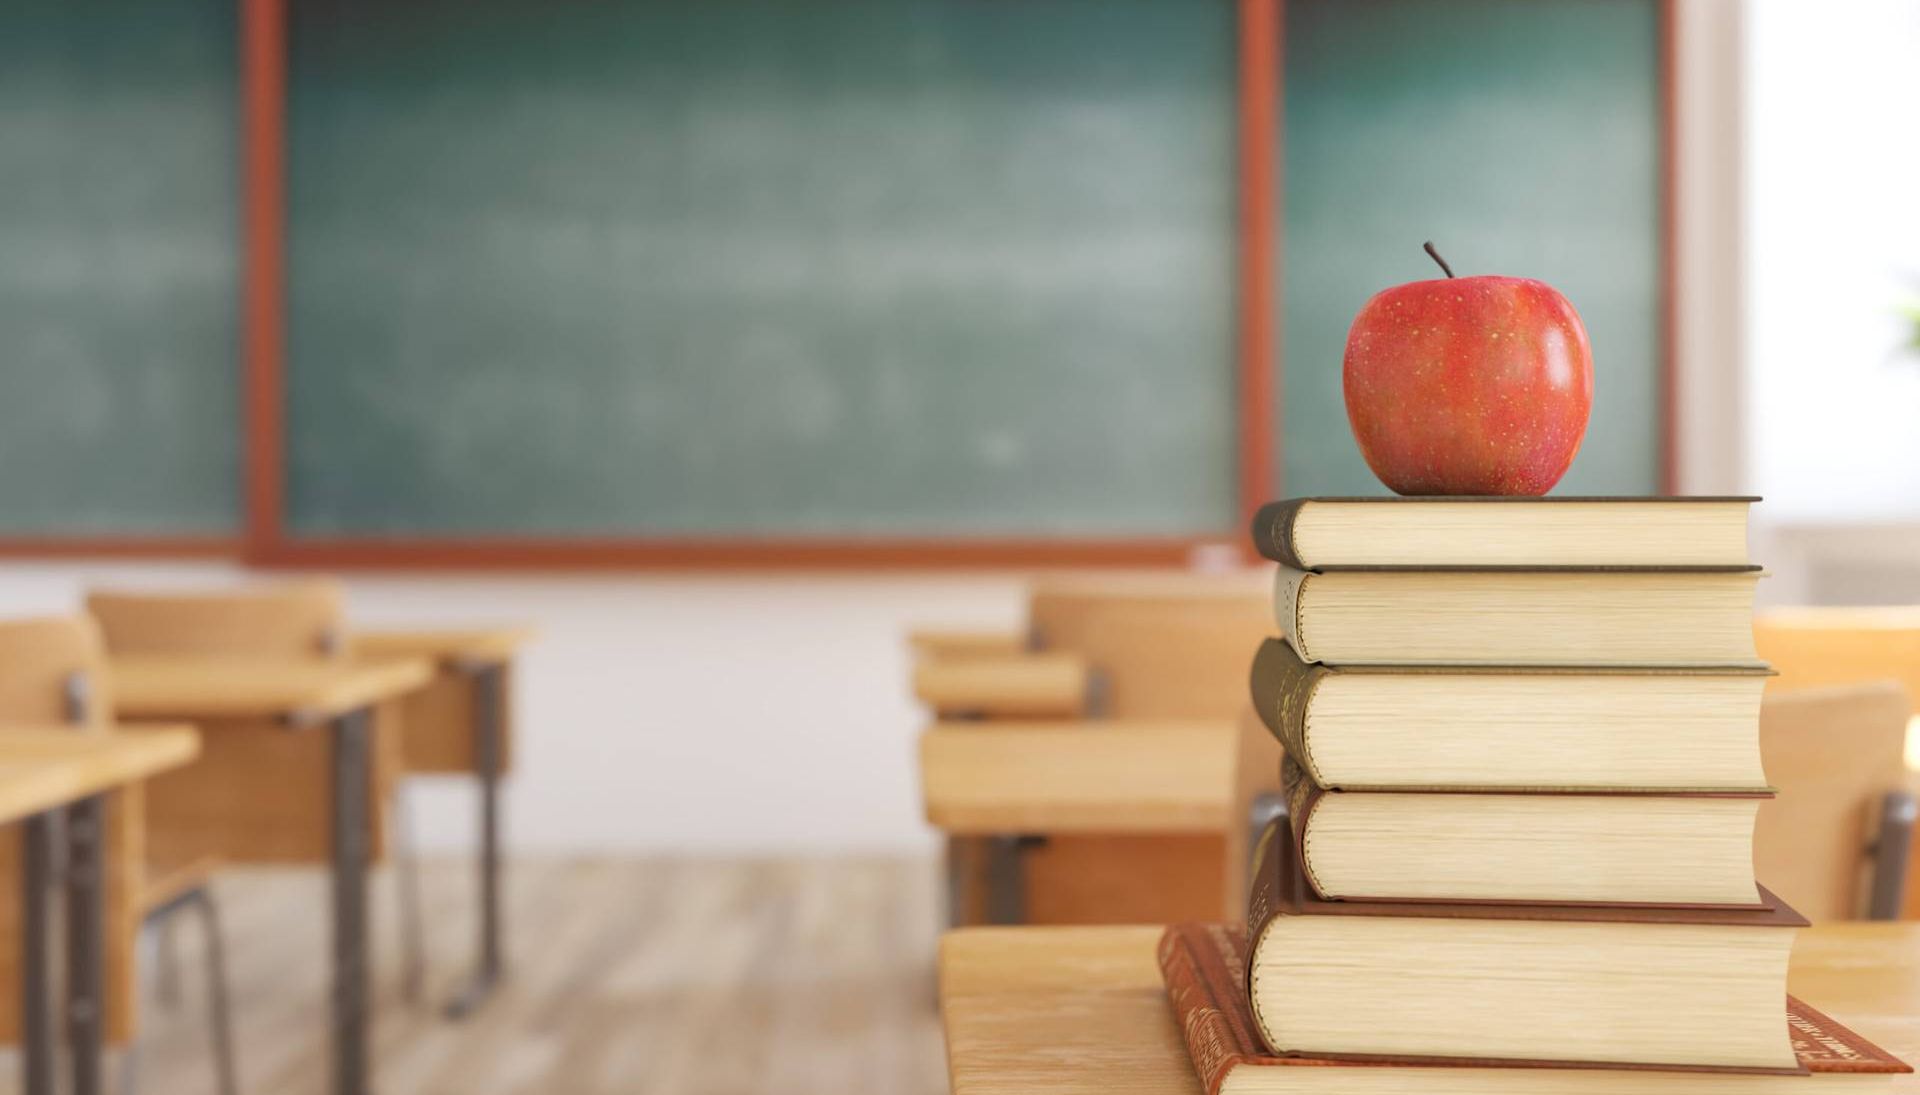 Photo of one red apple on top of books in an empty school classroom.